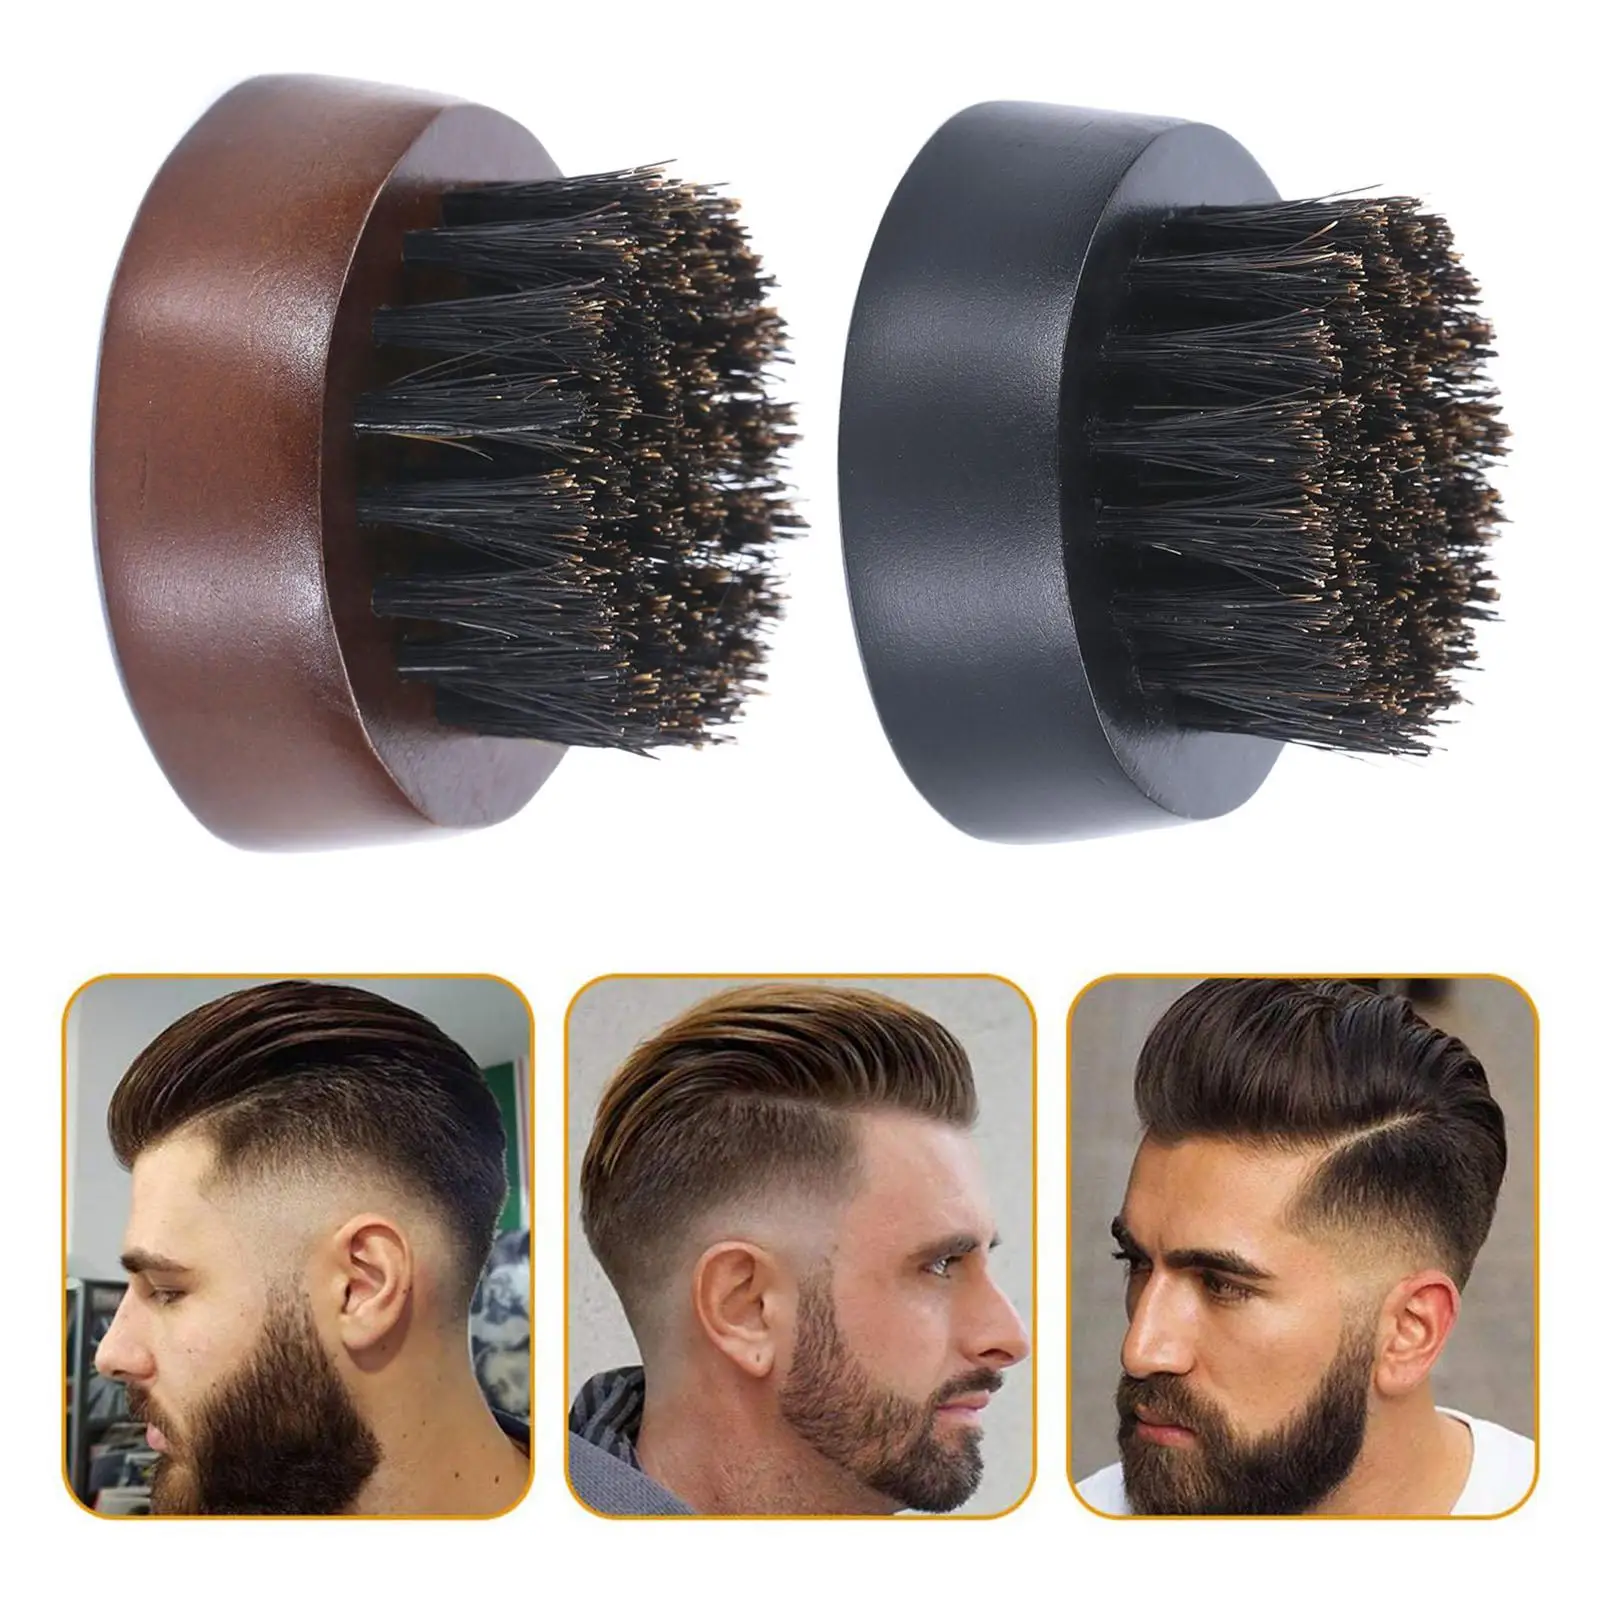 Wooden Hair Beard Brush Small and Round Soften Your Facial for Barber Men